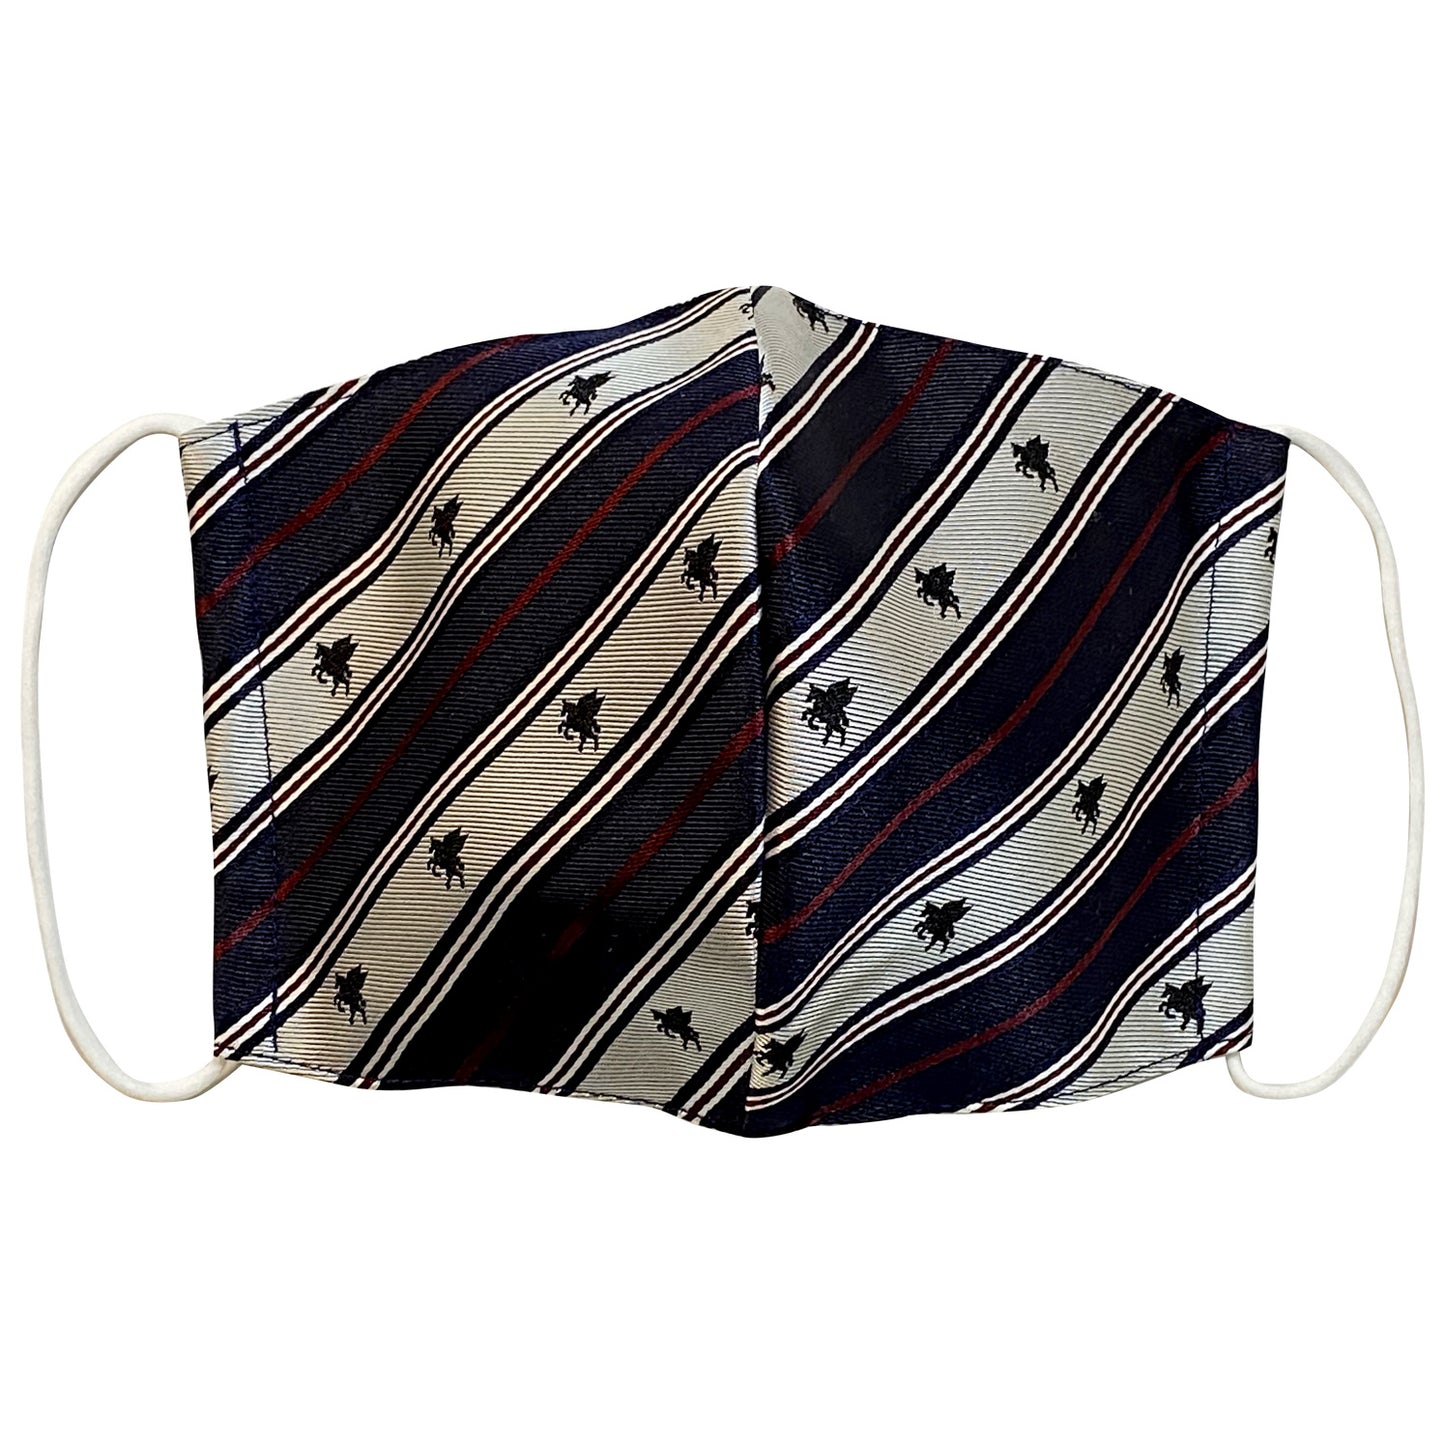 Washable Silk Face Mask Reusable Unisex -Striped Pattern Large Size Made in Japan FORTUNA Tokyo